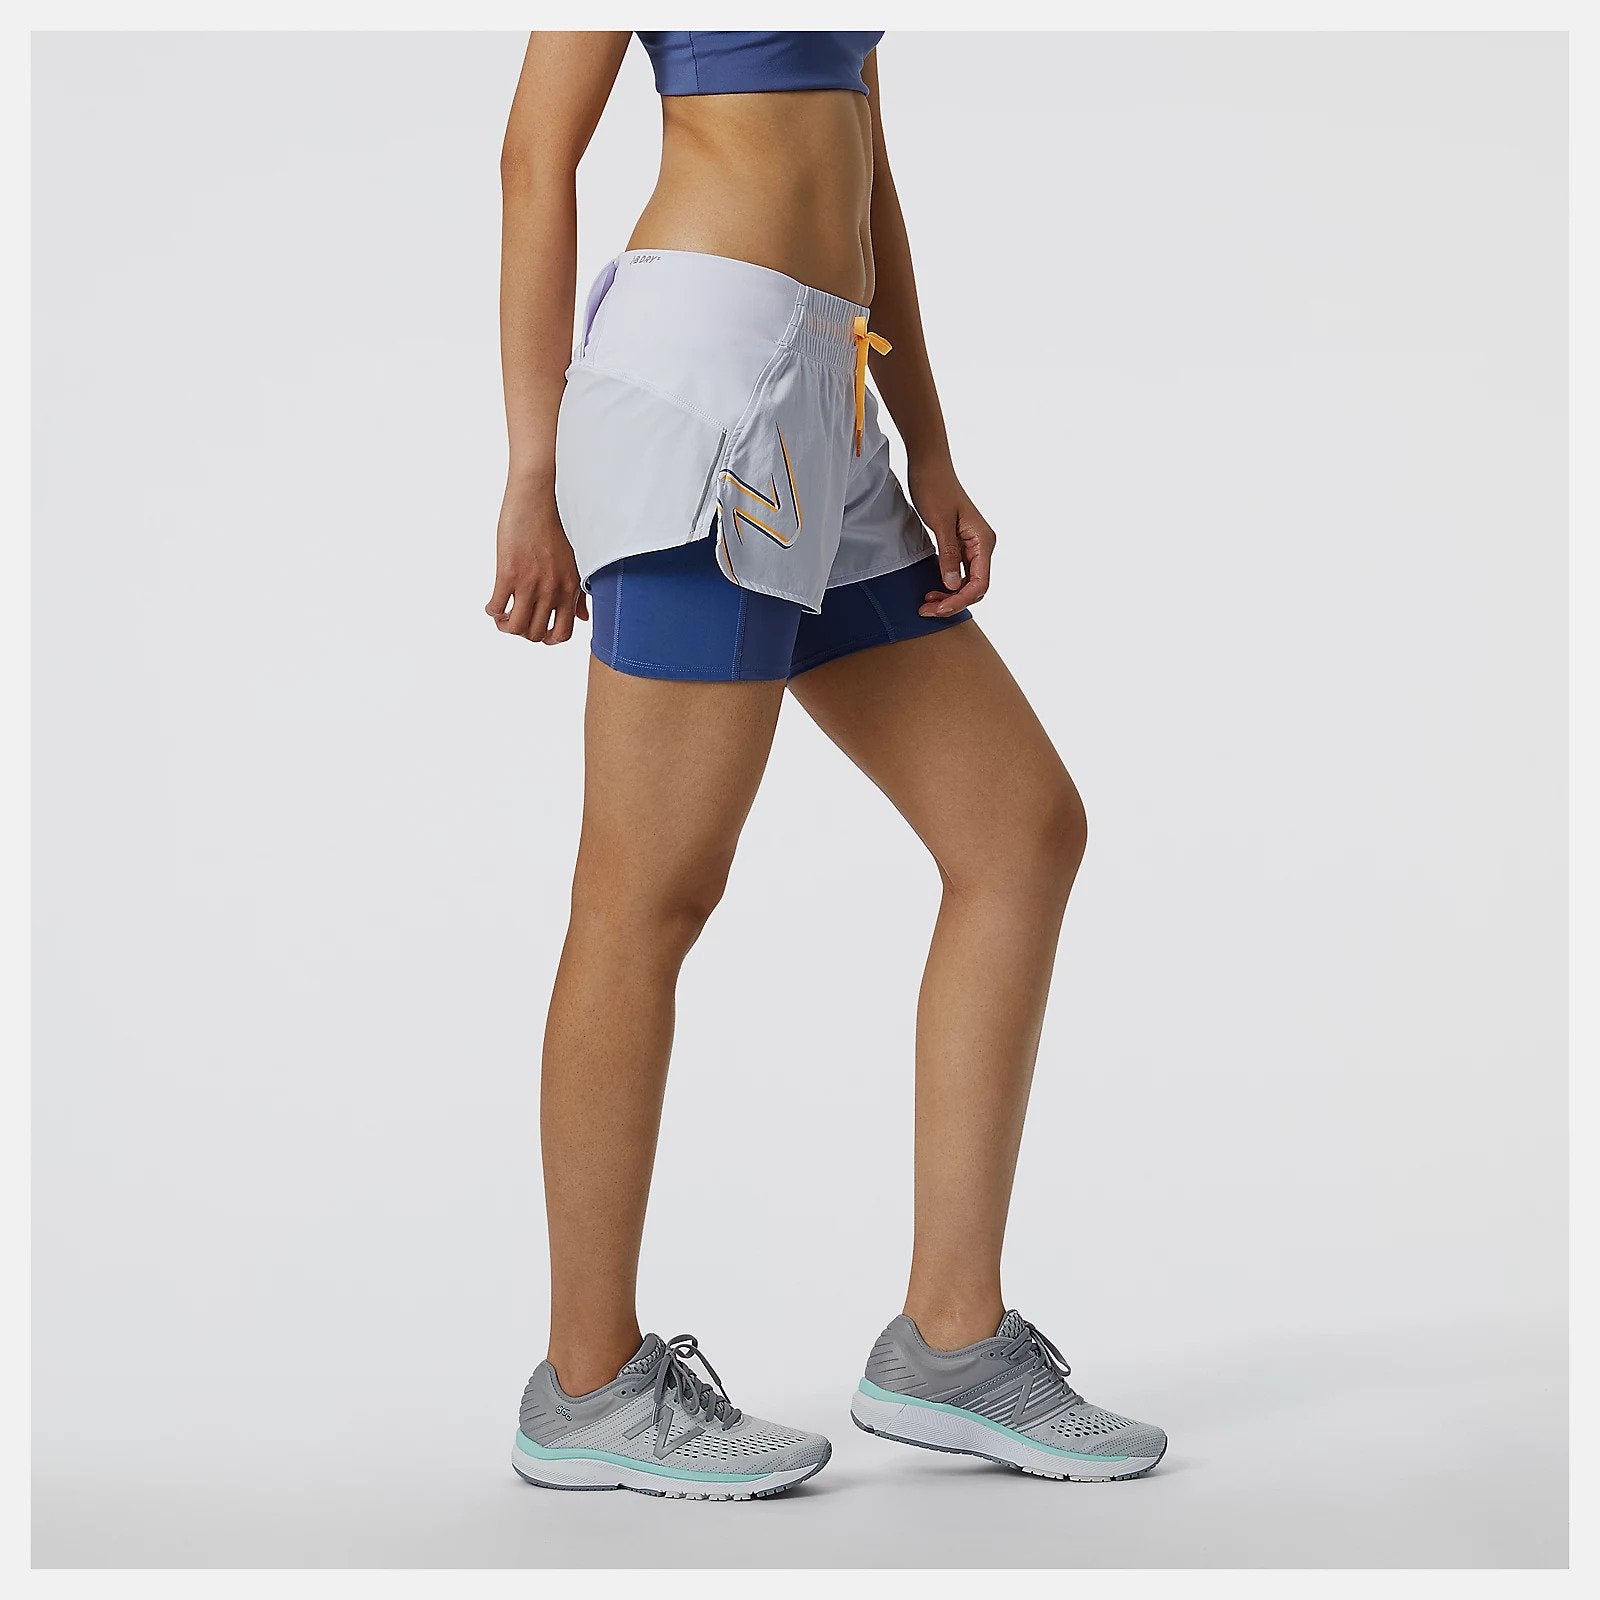 Featuring a lightweight woven shell and fitted inner short with NB DRYx wicking technology, our Printed Impact Run 2in1 Short helps you feel cool and dry on your run. These women's running shorts have a storage tunnel to thread extra layers through for a hands-free workout. Plus, a drop-in pocket on the inner fitted short offers quick access to nutrition and valuables. Finished with a print and reflective details for style